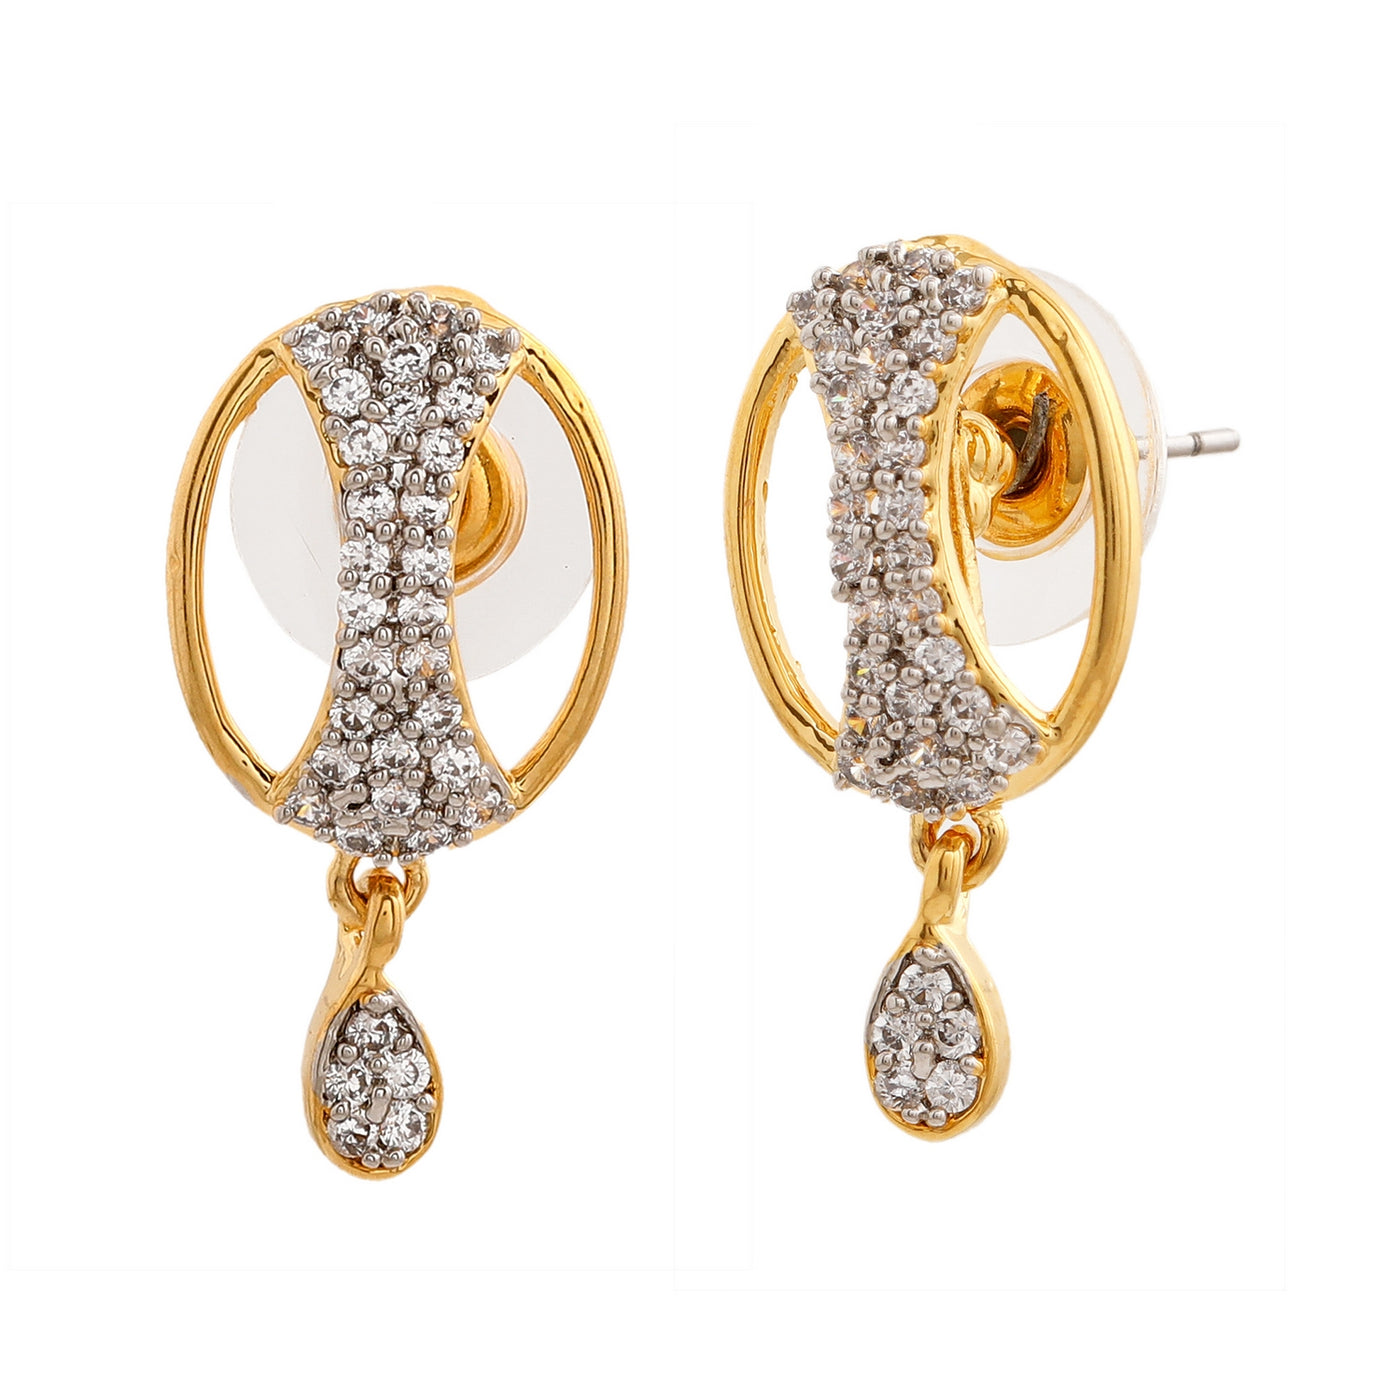 Estele Gold Plated Star and Moon American Diamond Earrings for Women